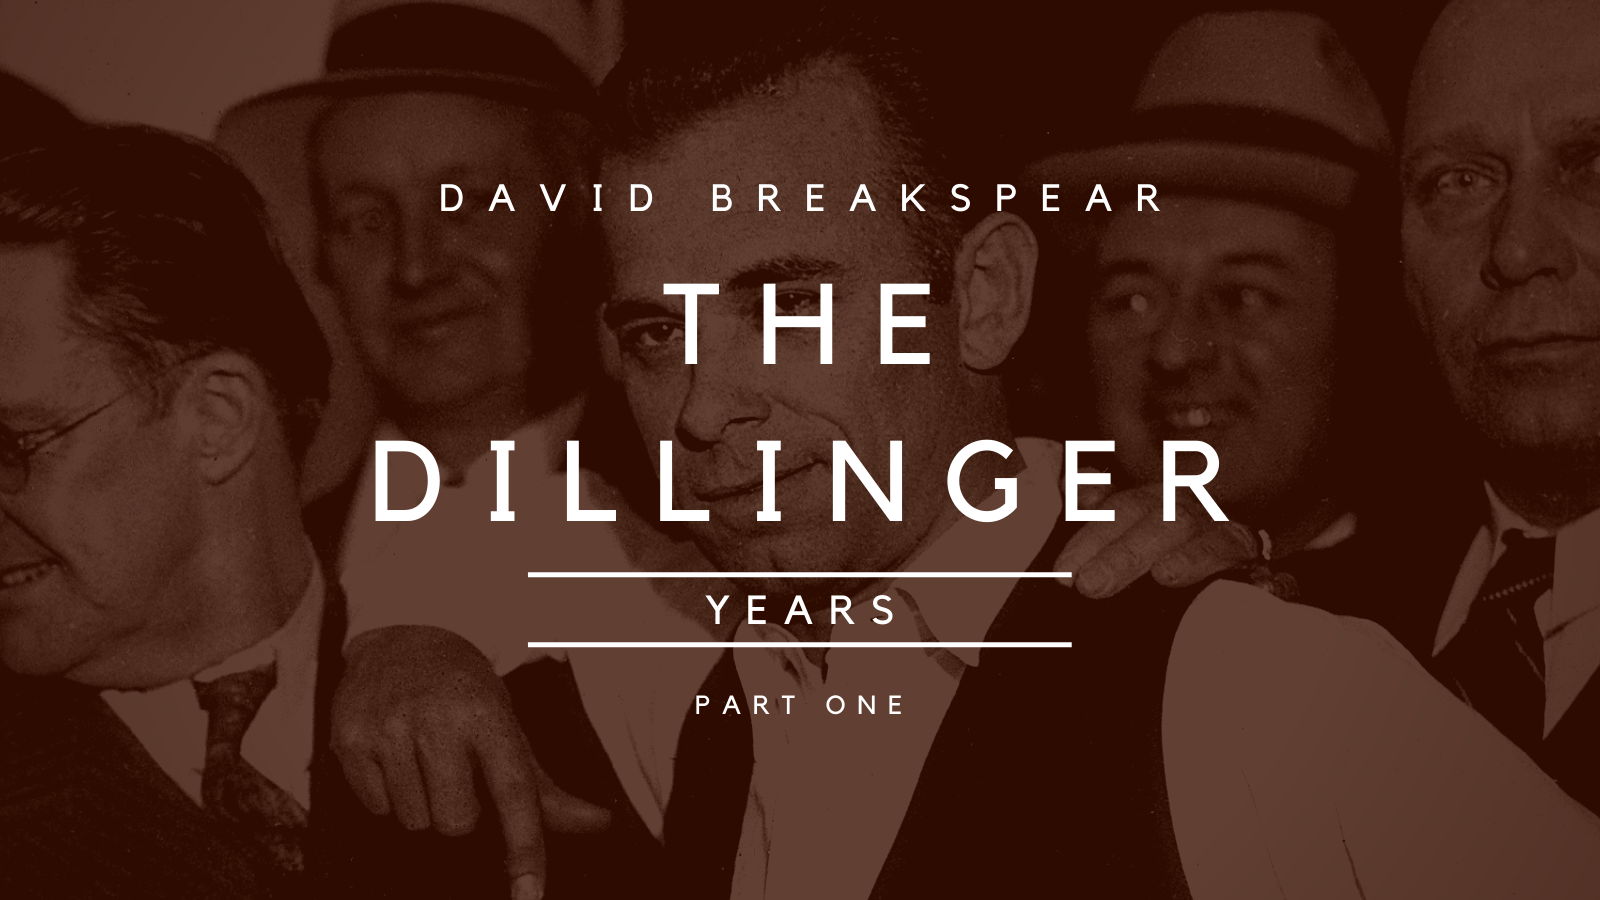 The Dillinger Years Harry Pierpont - The Mentor